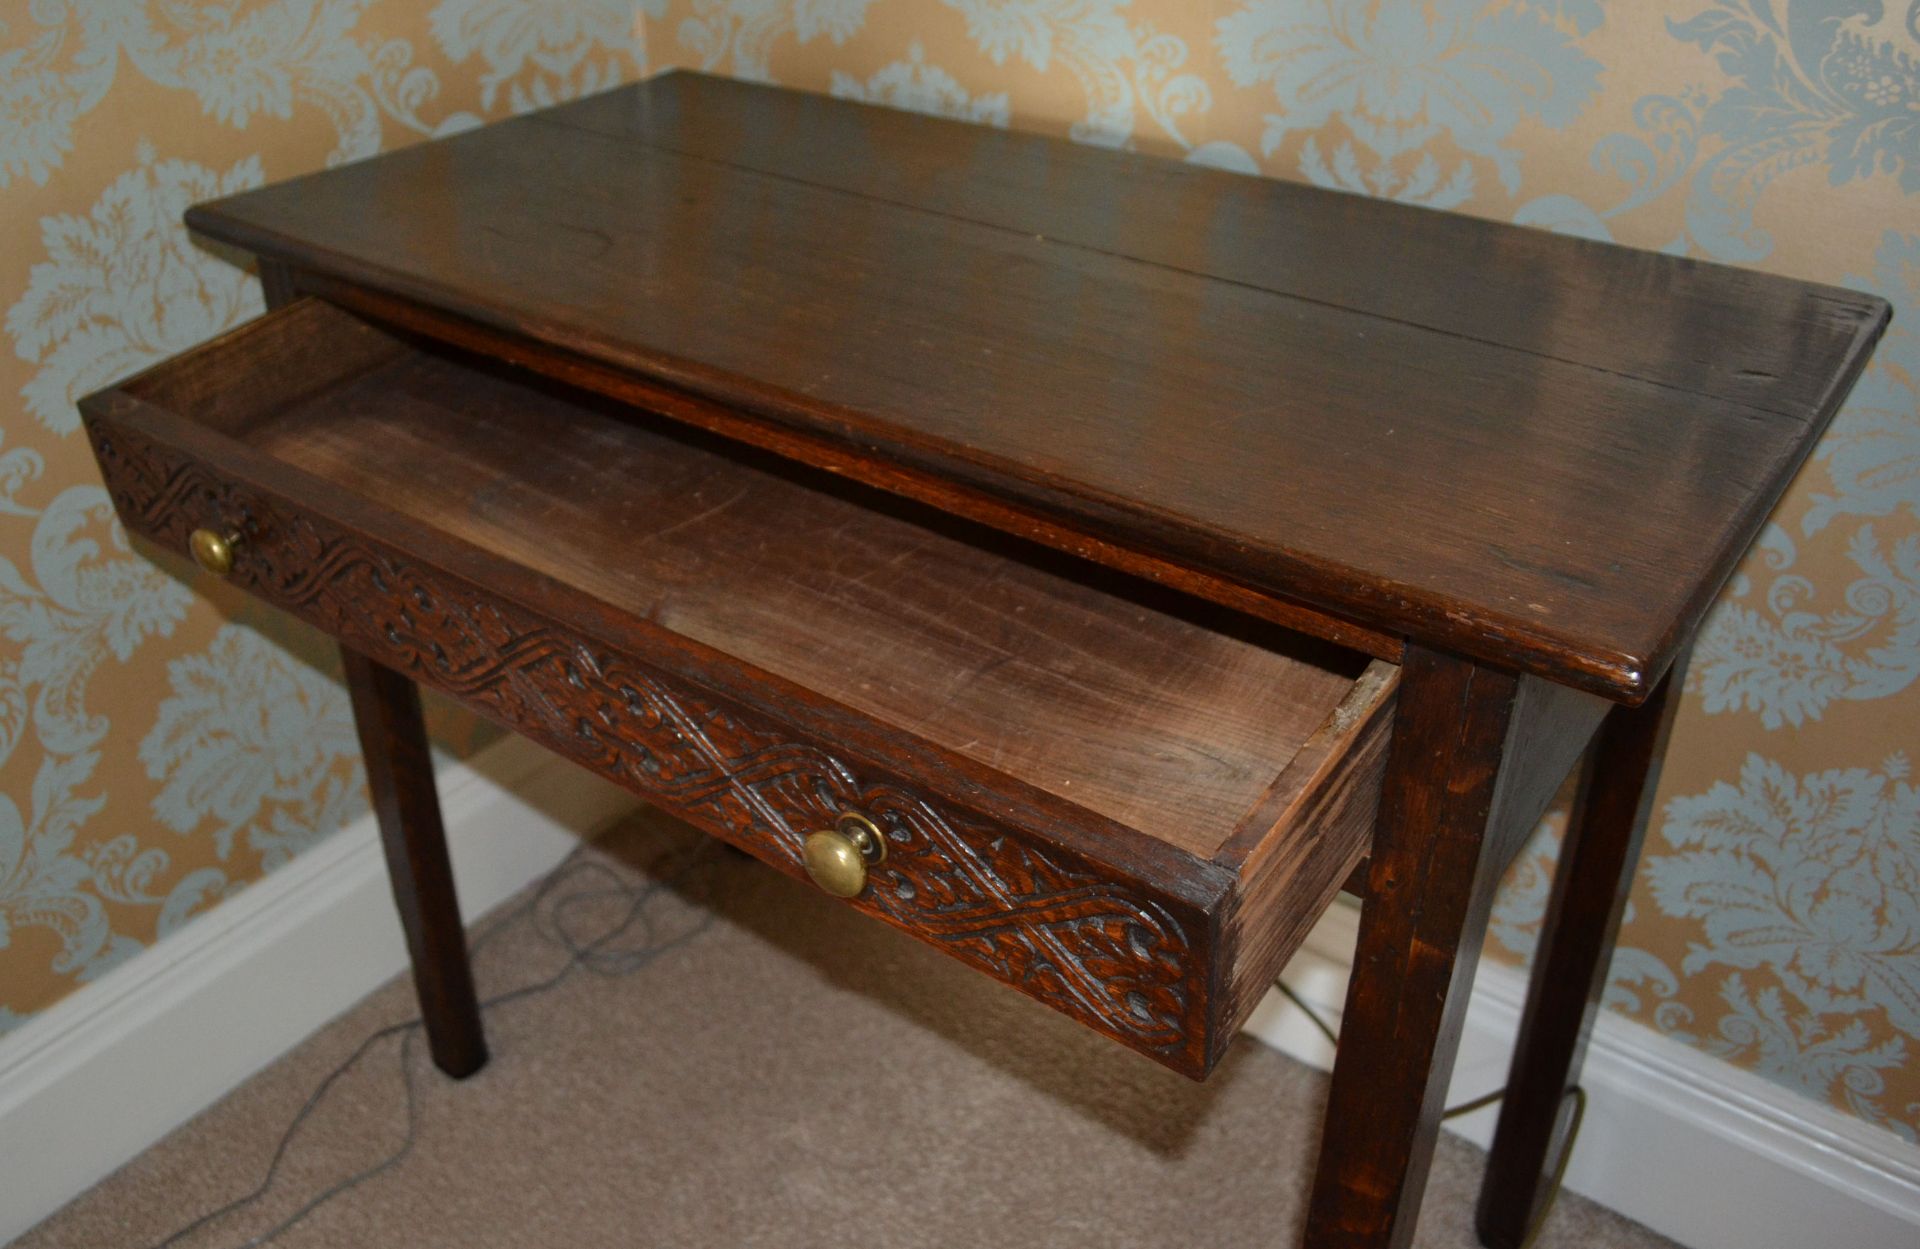 1 x Antique Solid Wood Console Table - CL226 - Location: Knutsford WA16 - NO VAT ON THE HAMMER - Image 7 of 9